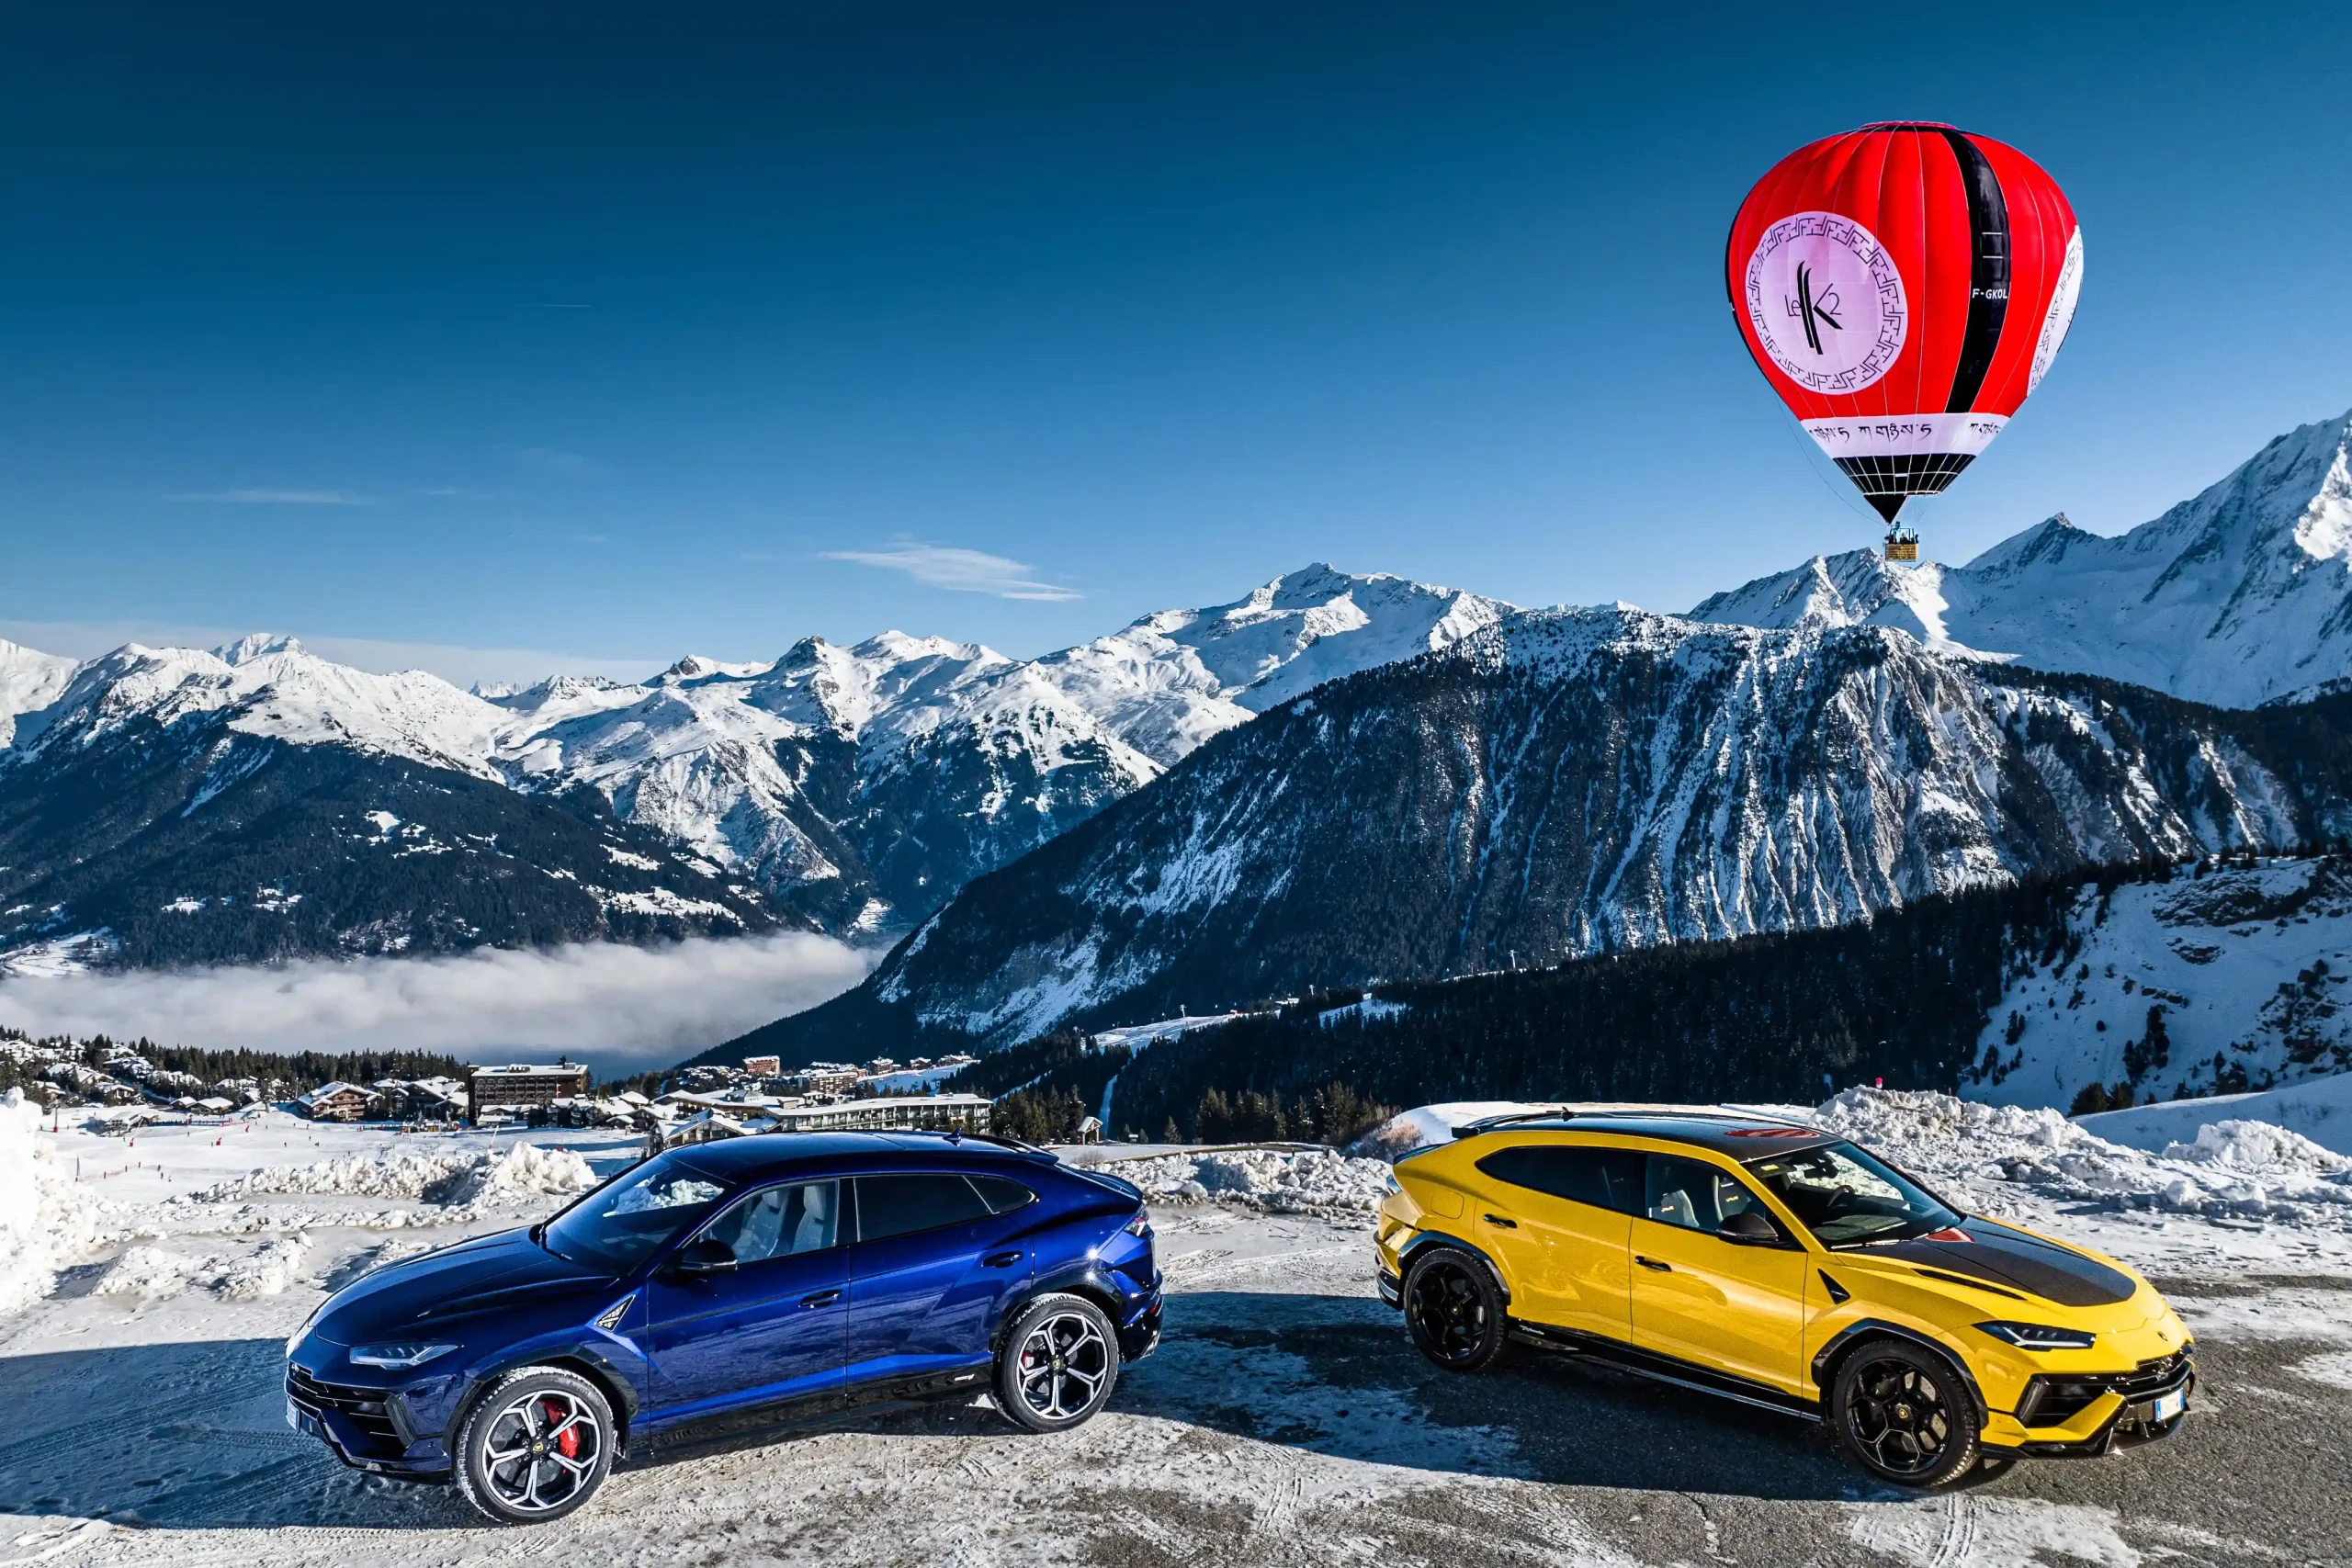 An exciting winter comes to an end for Automobili Lamborghini © Copyright PLPG GLOBAL MEDIA 2023